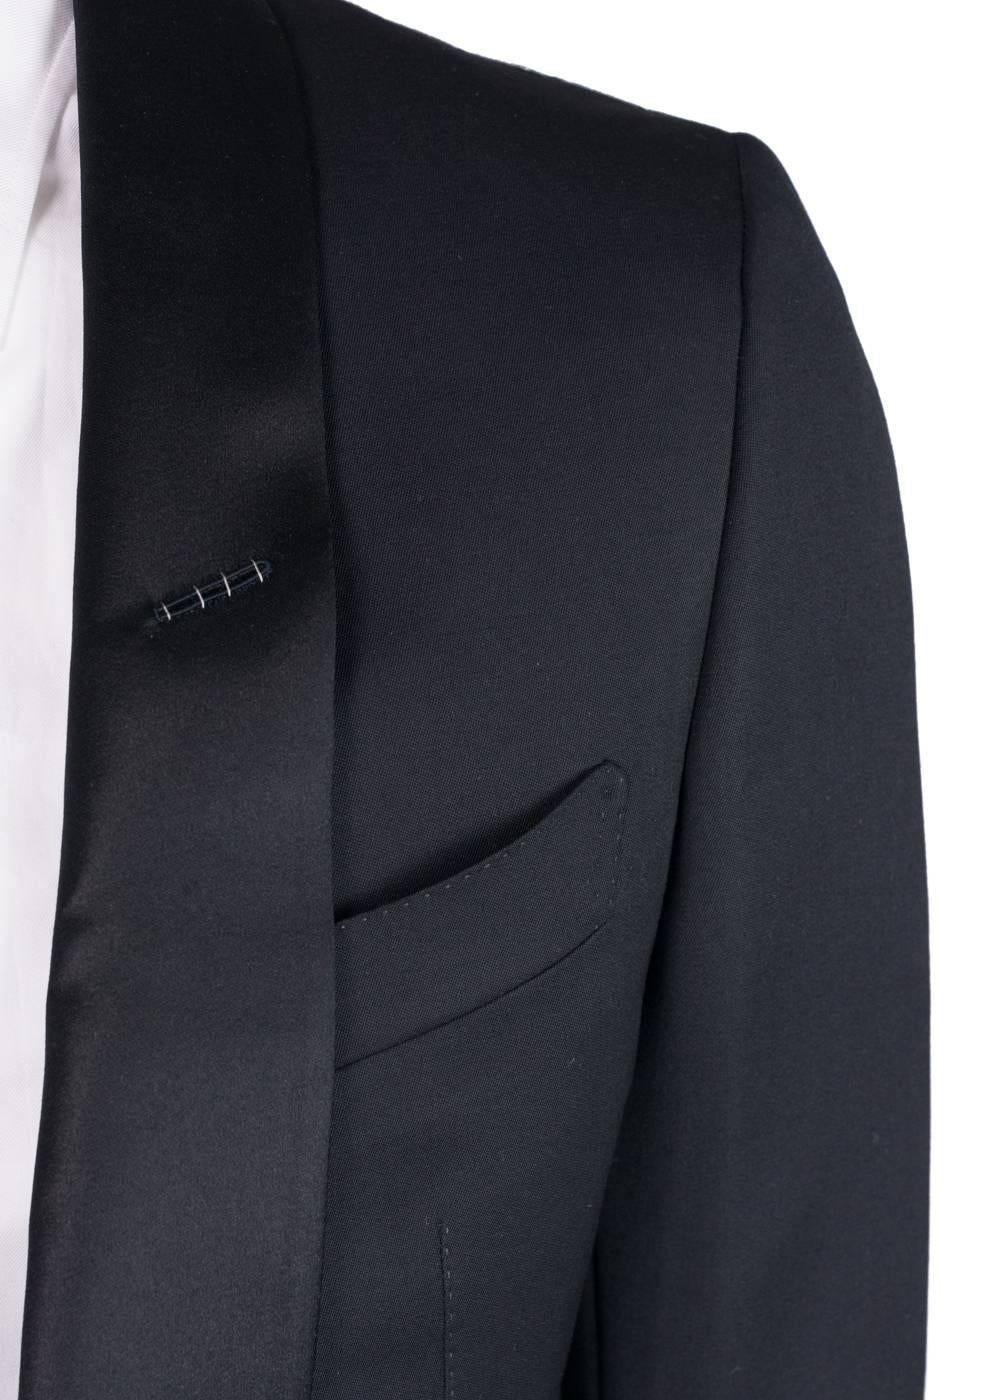 Brand New Tom Ford O'Connor Tuxedo
Original Tags & Hanger Included
Retails In-Stores & Online for $5470
IT 48R / US 38

A signature tuxedo, Tom Ford's Satin Shawl Lapel 'O'Connor' Base Tuxedo is crafted from a luxury twill fabric in rich black. This